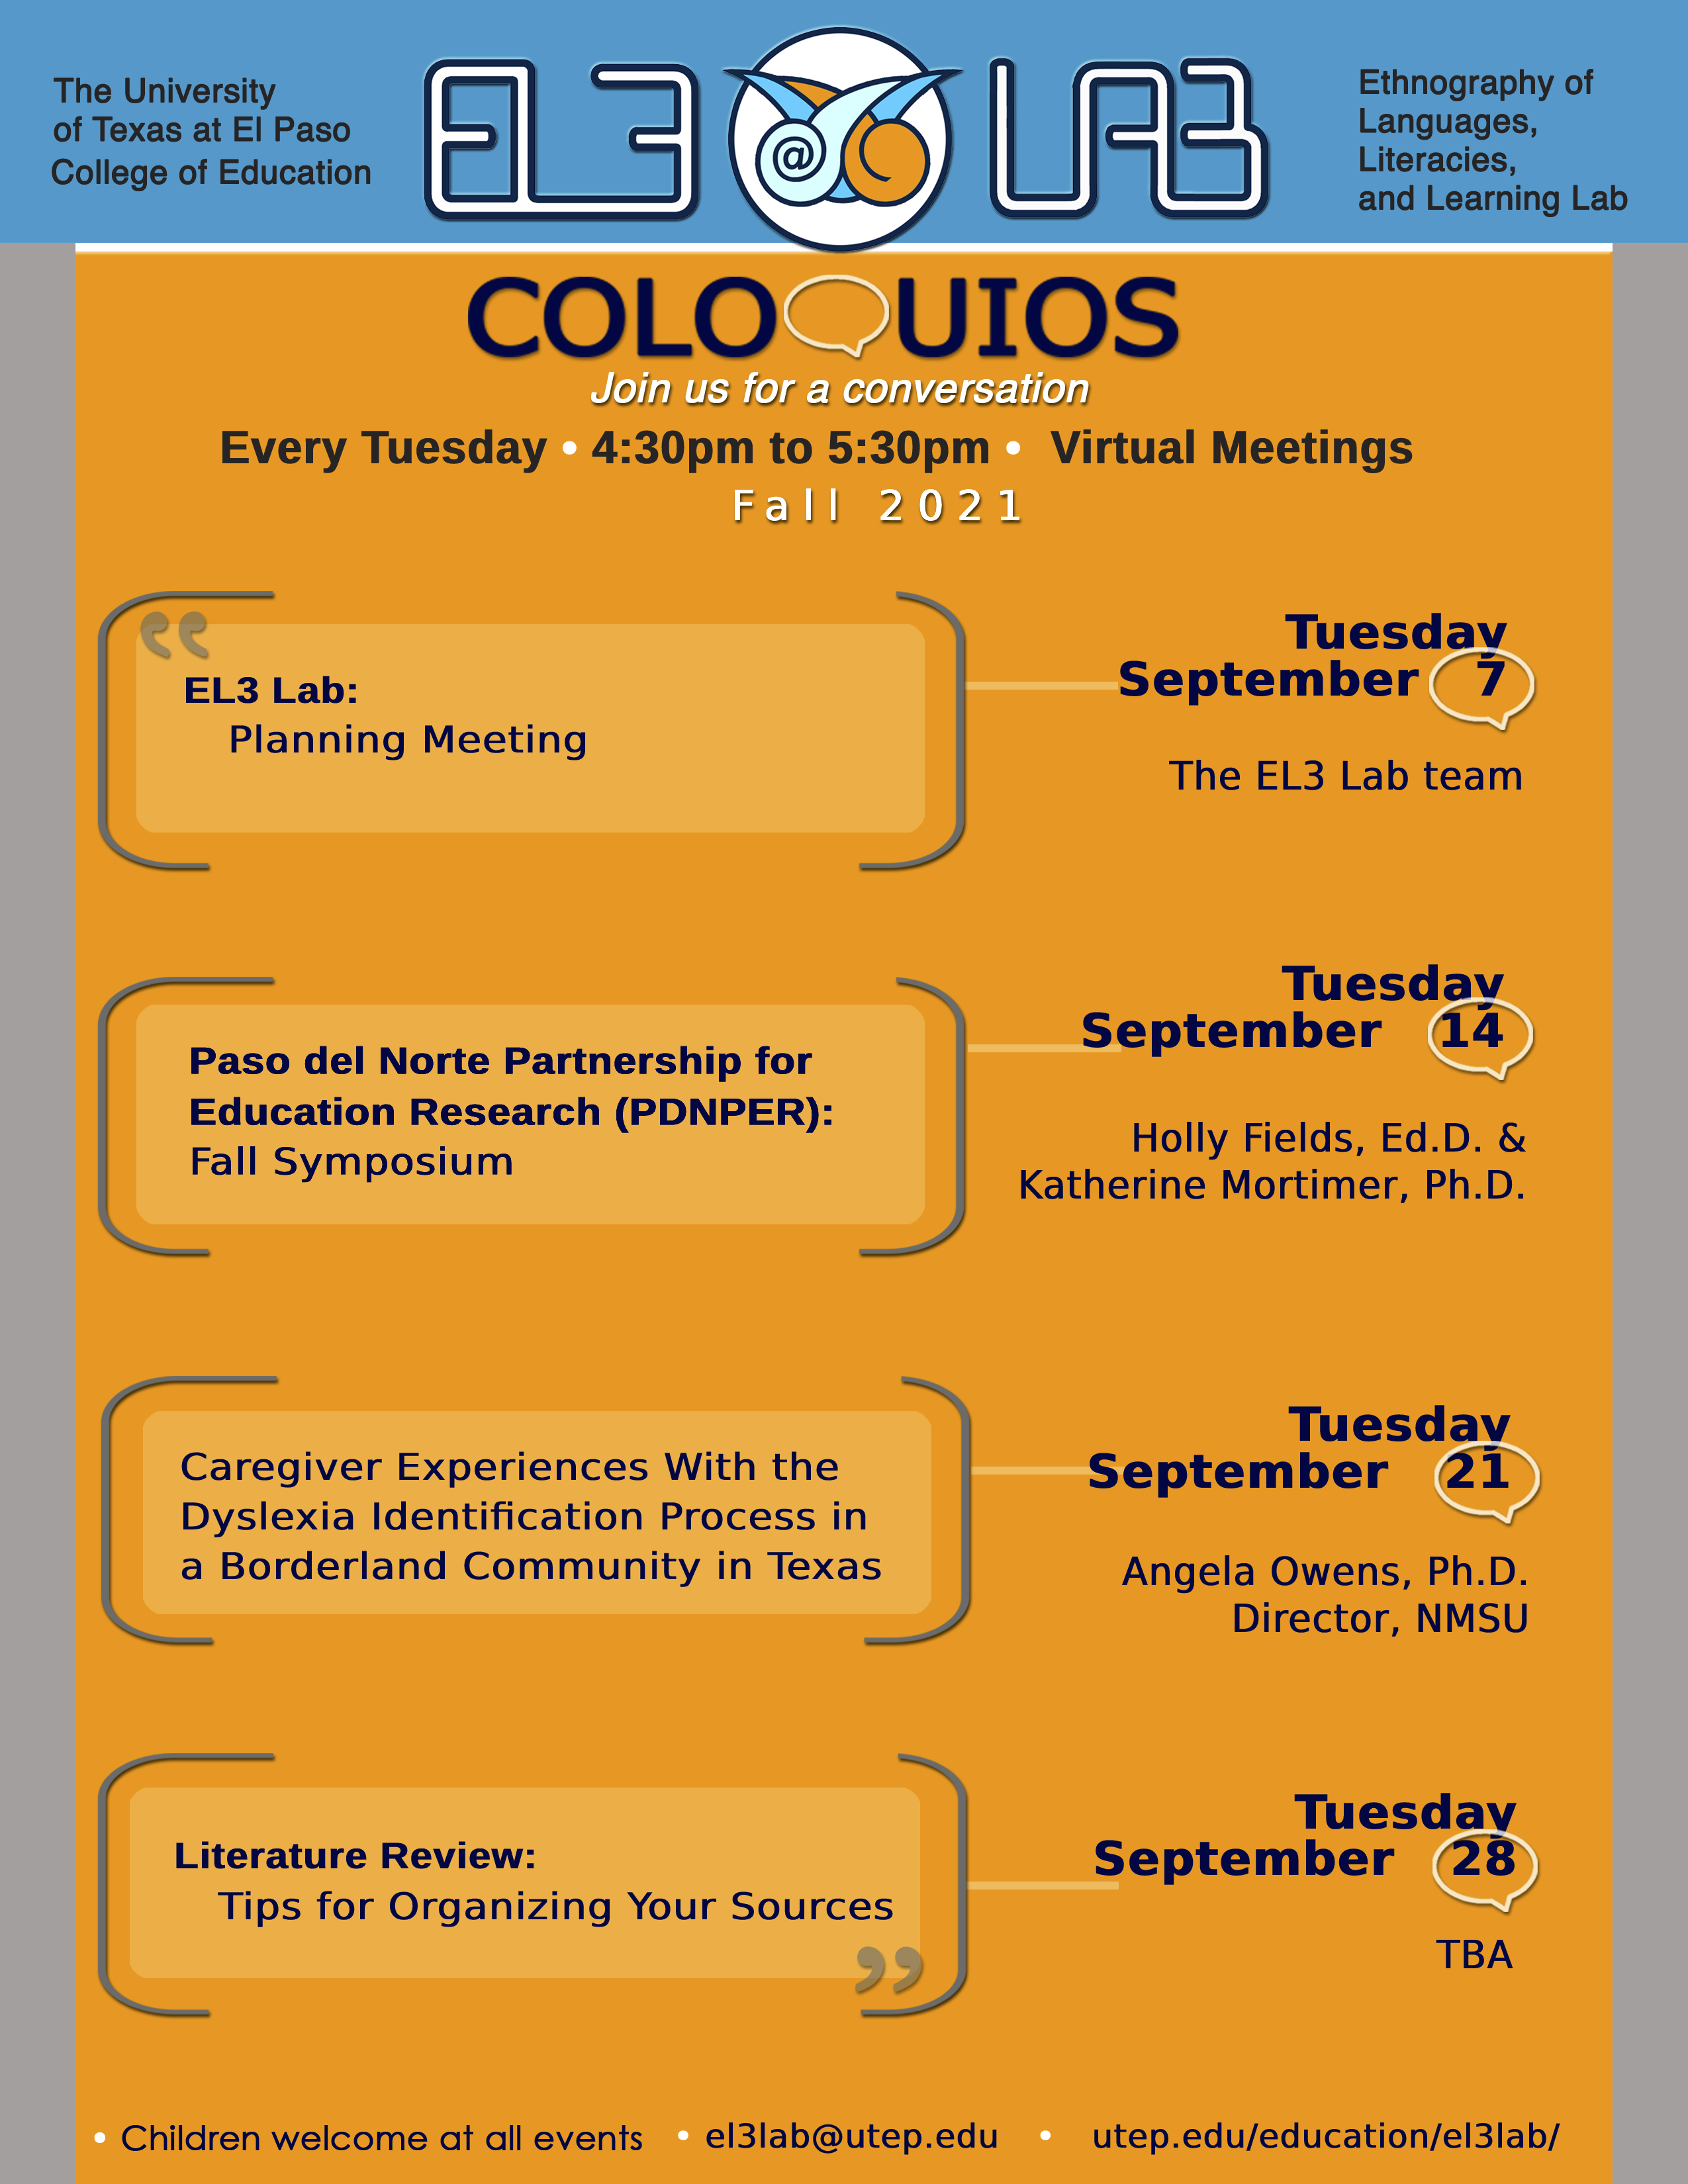 Coloquio-Flyer-Fall-2021-1.png